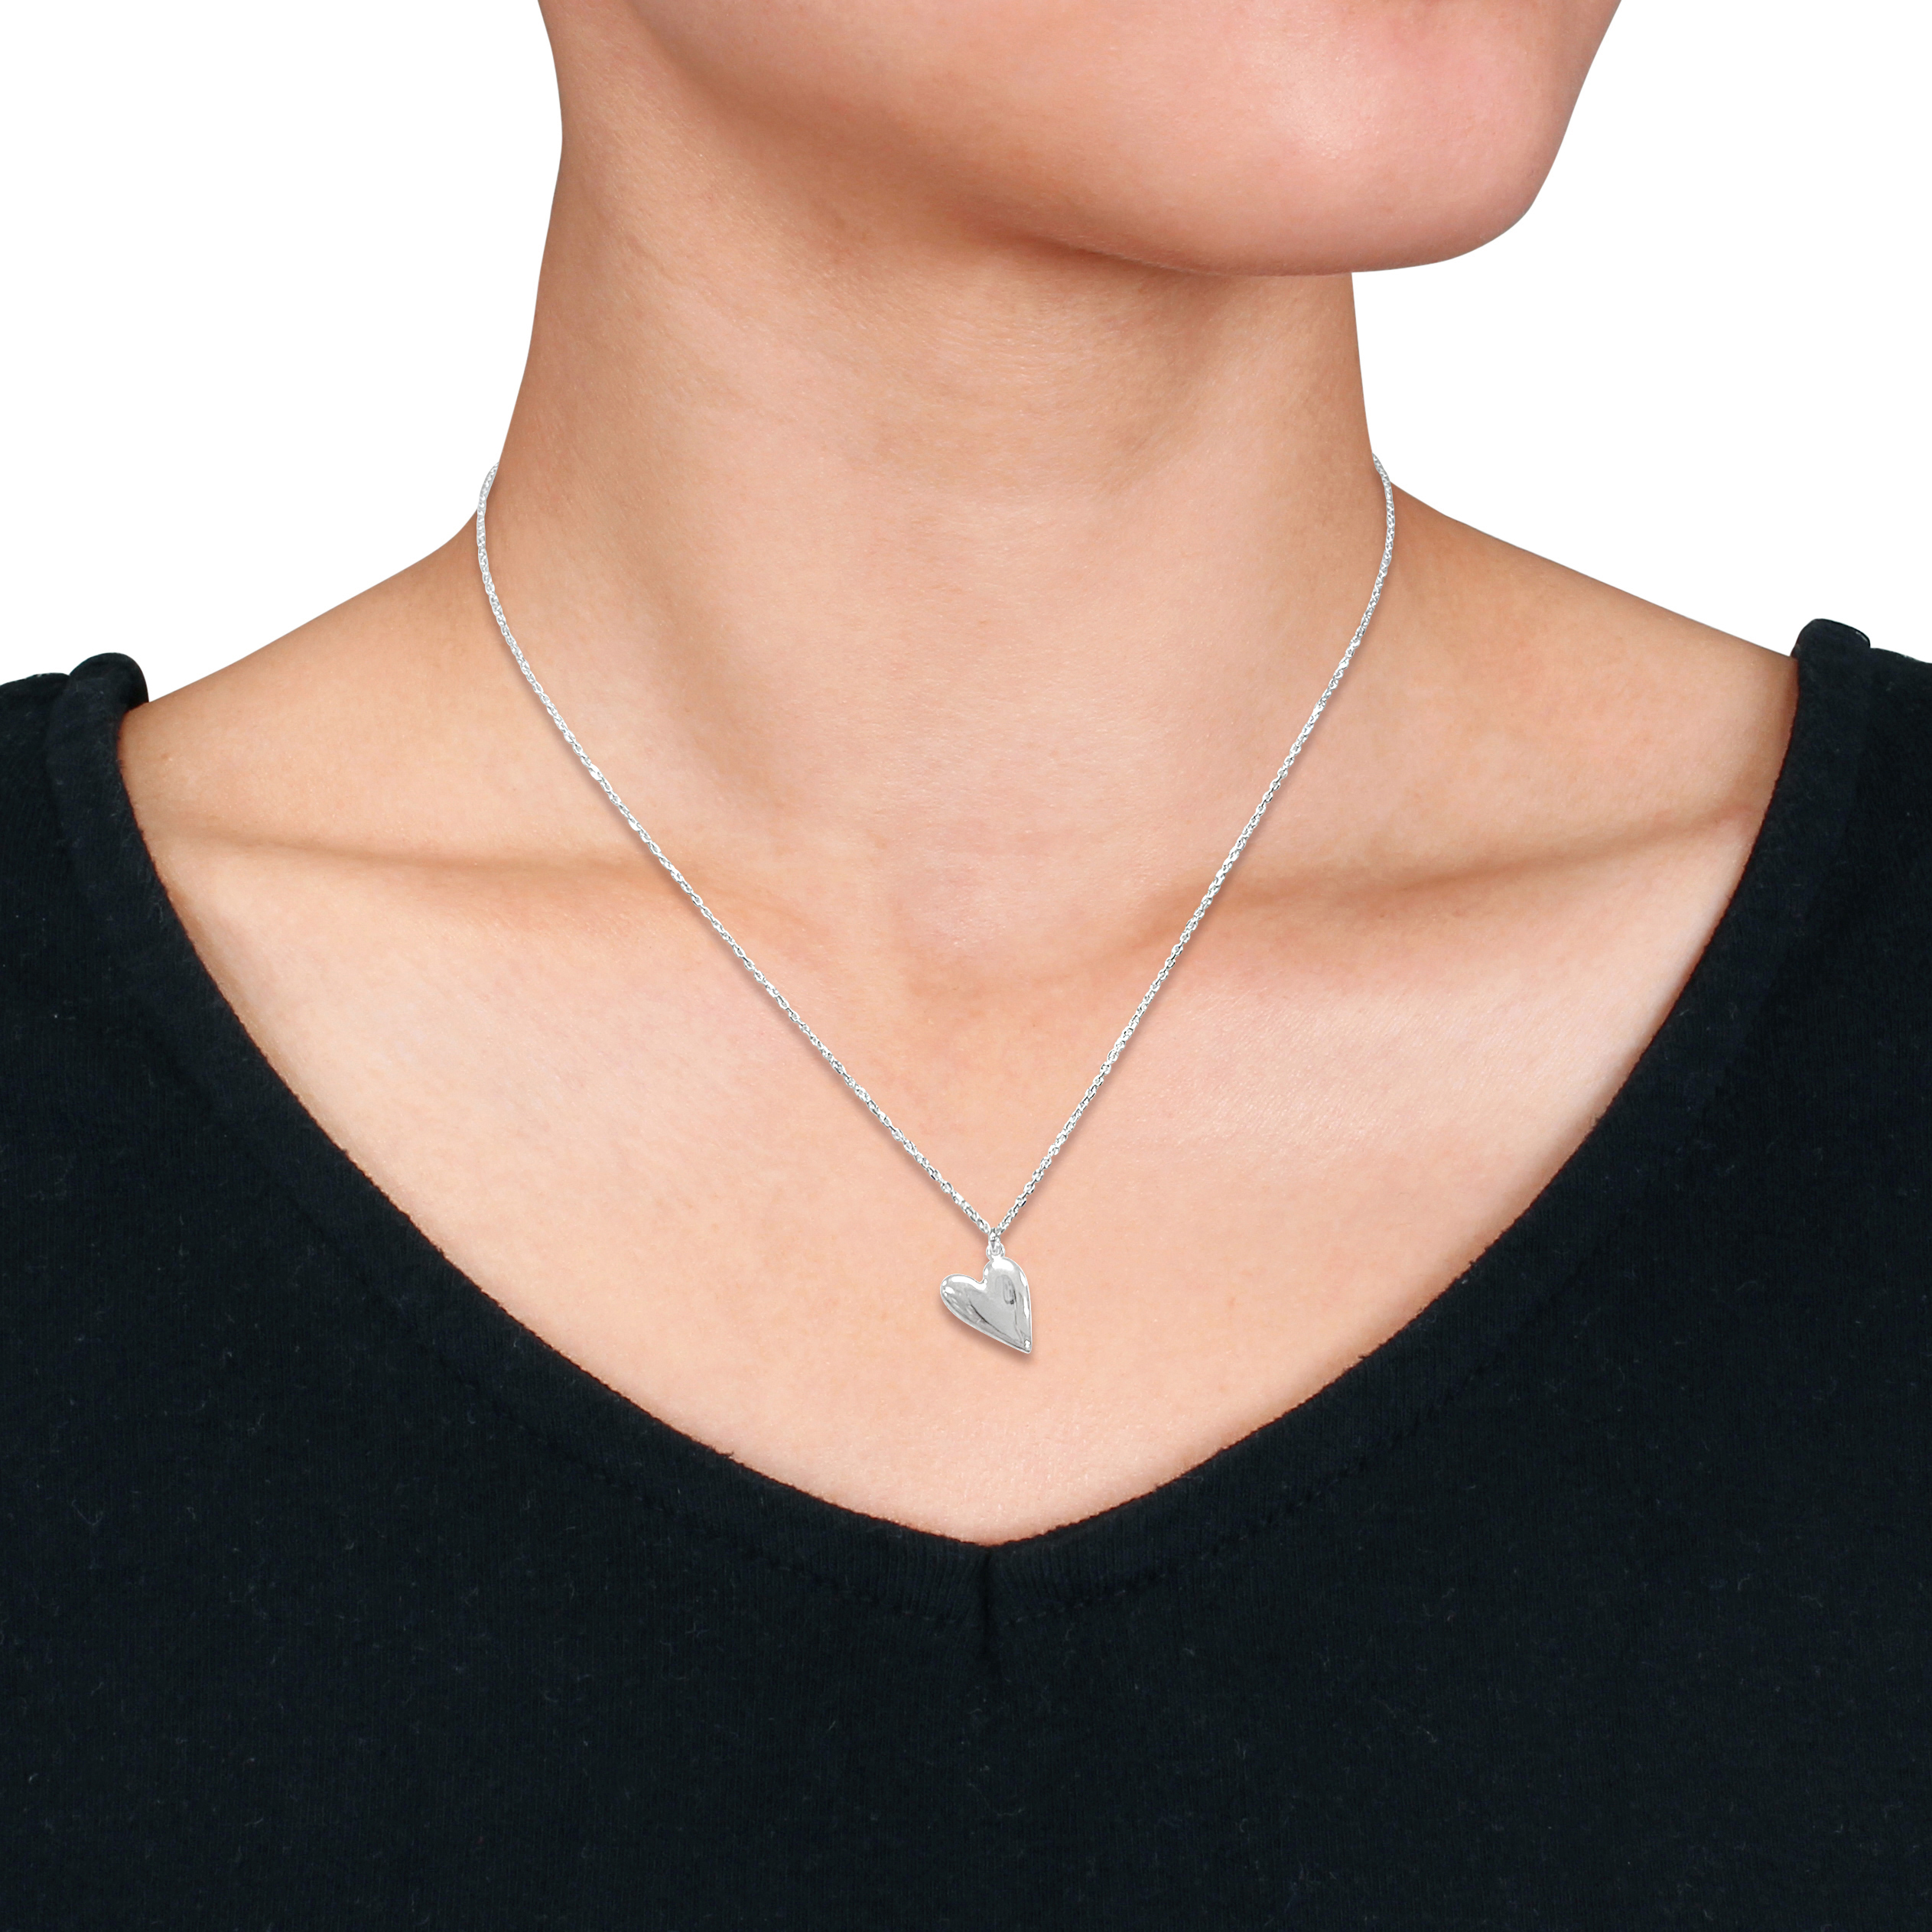 Heart Charm Necklace in Sterling Silver - 16.5+1 in.